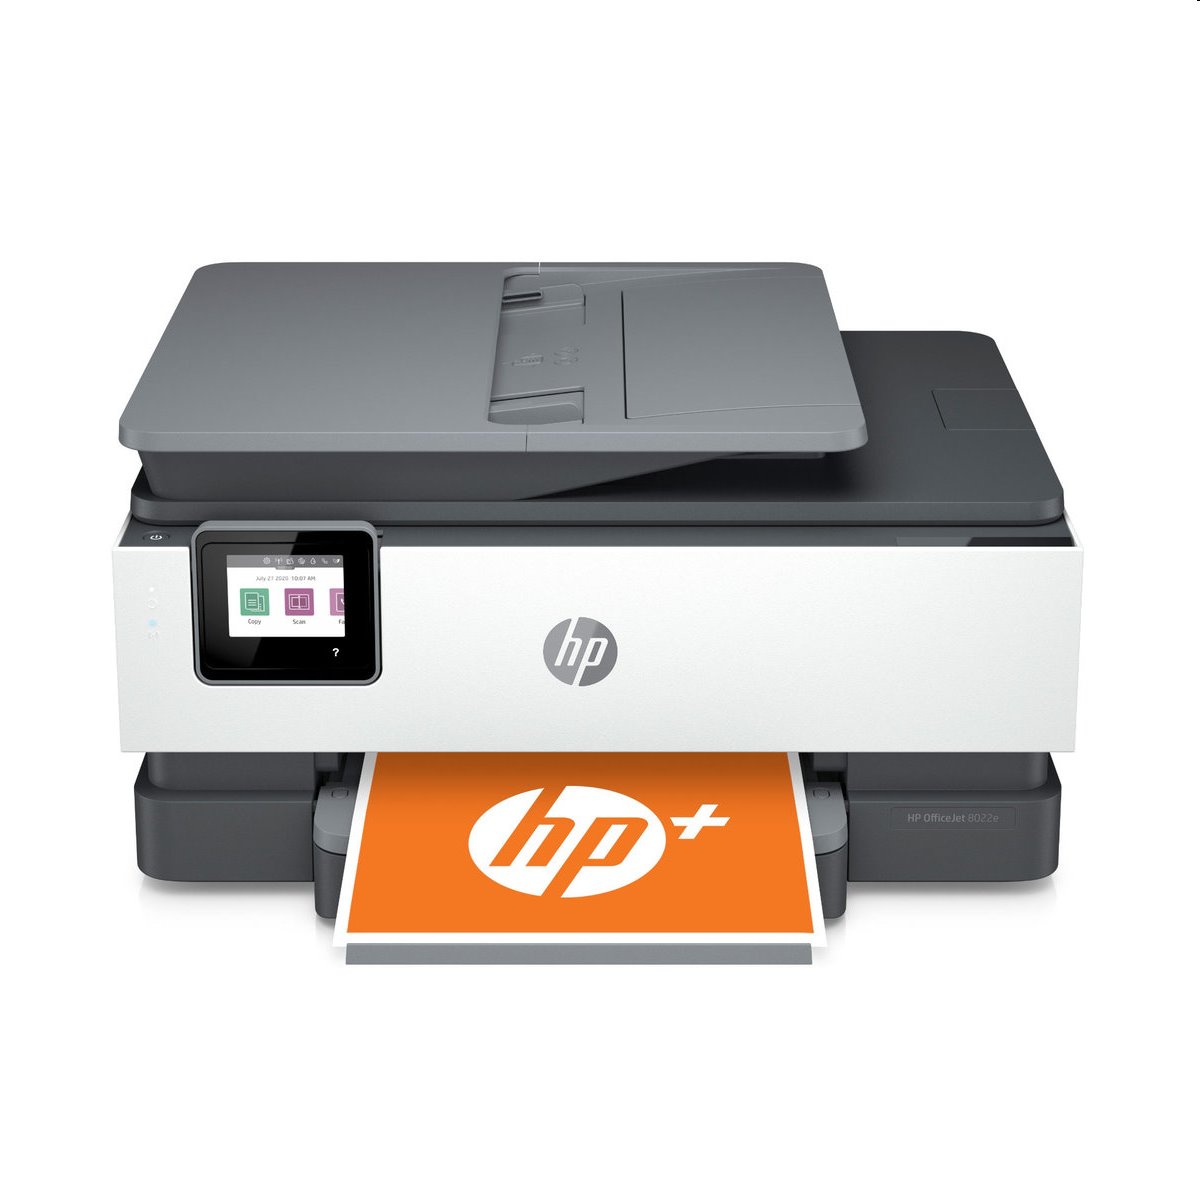 HP All-in-One Officejet Pro 8022e HP+ (A4, 20 ppm, USB 102.0, Ethernet, Wi-Fi, Print, Scan, Copy, FAX, Duplex, ADF)